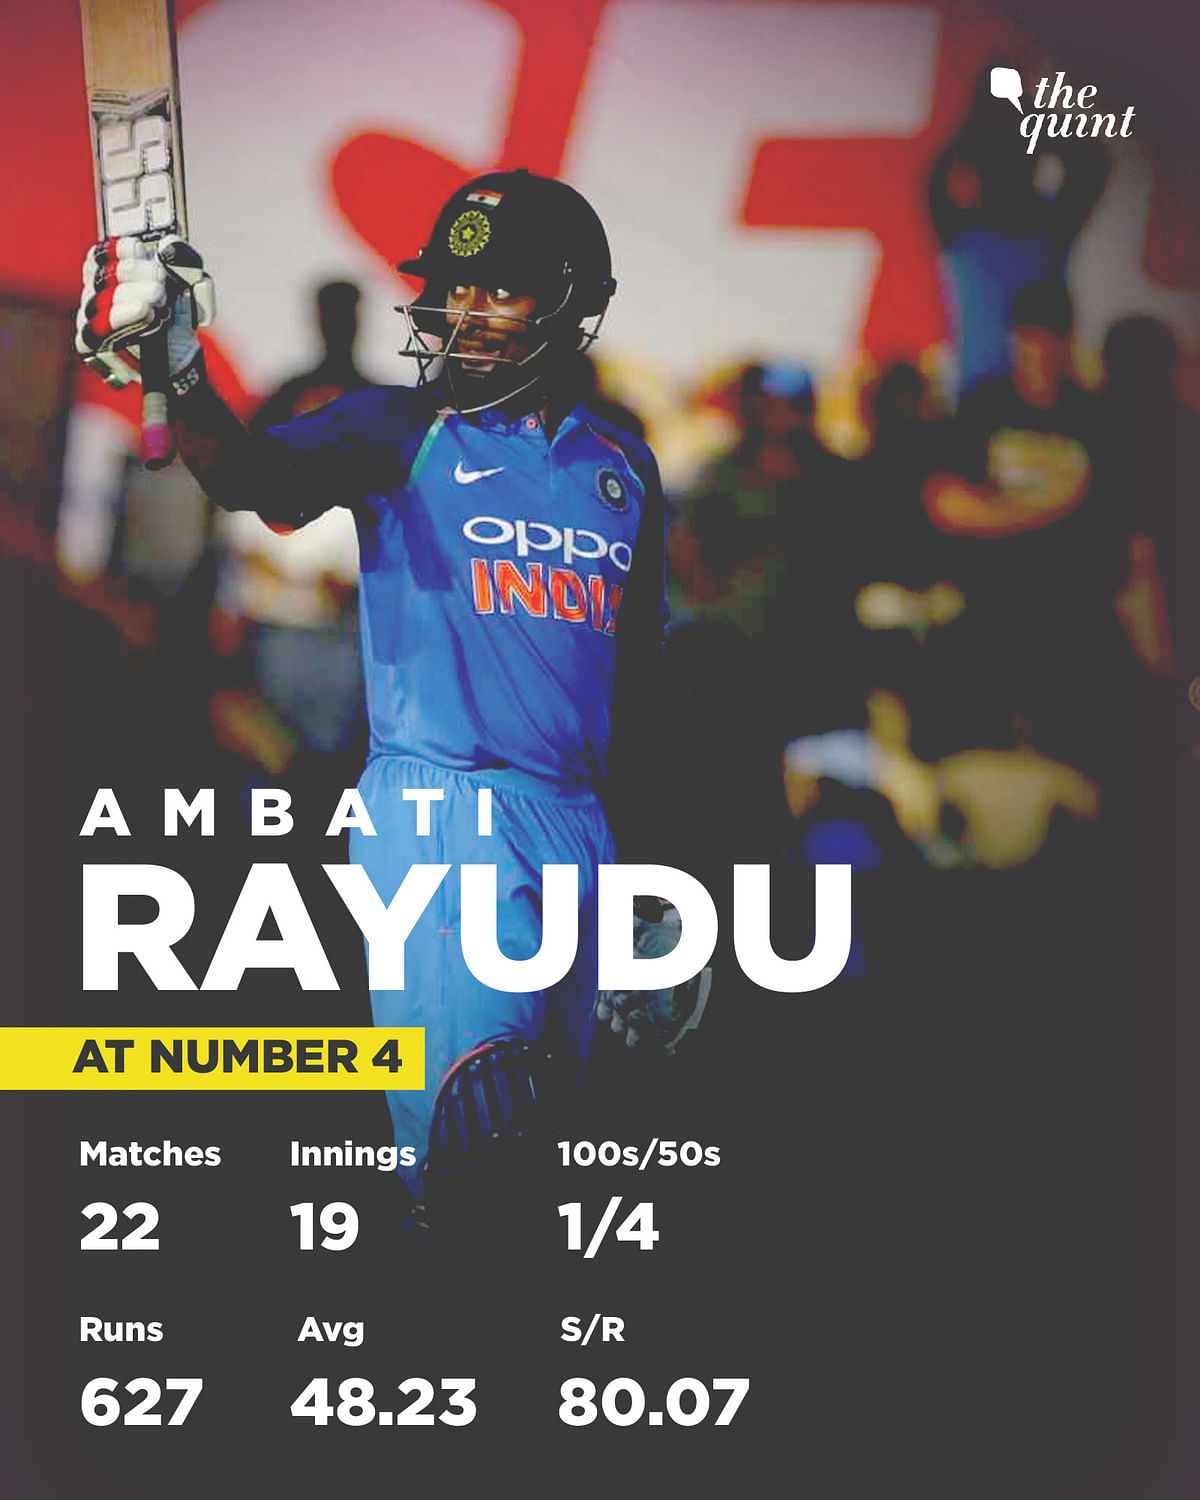 In the last two years, Manish Pandey, Rahane, Dhoni, Rayudu, Dinesh Karthik have batted at the number four position.